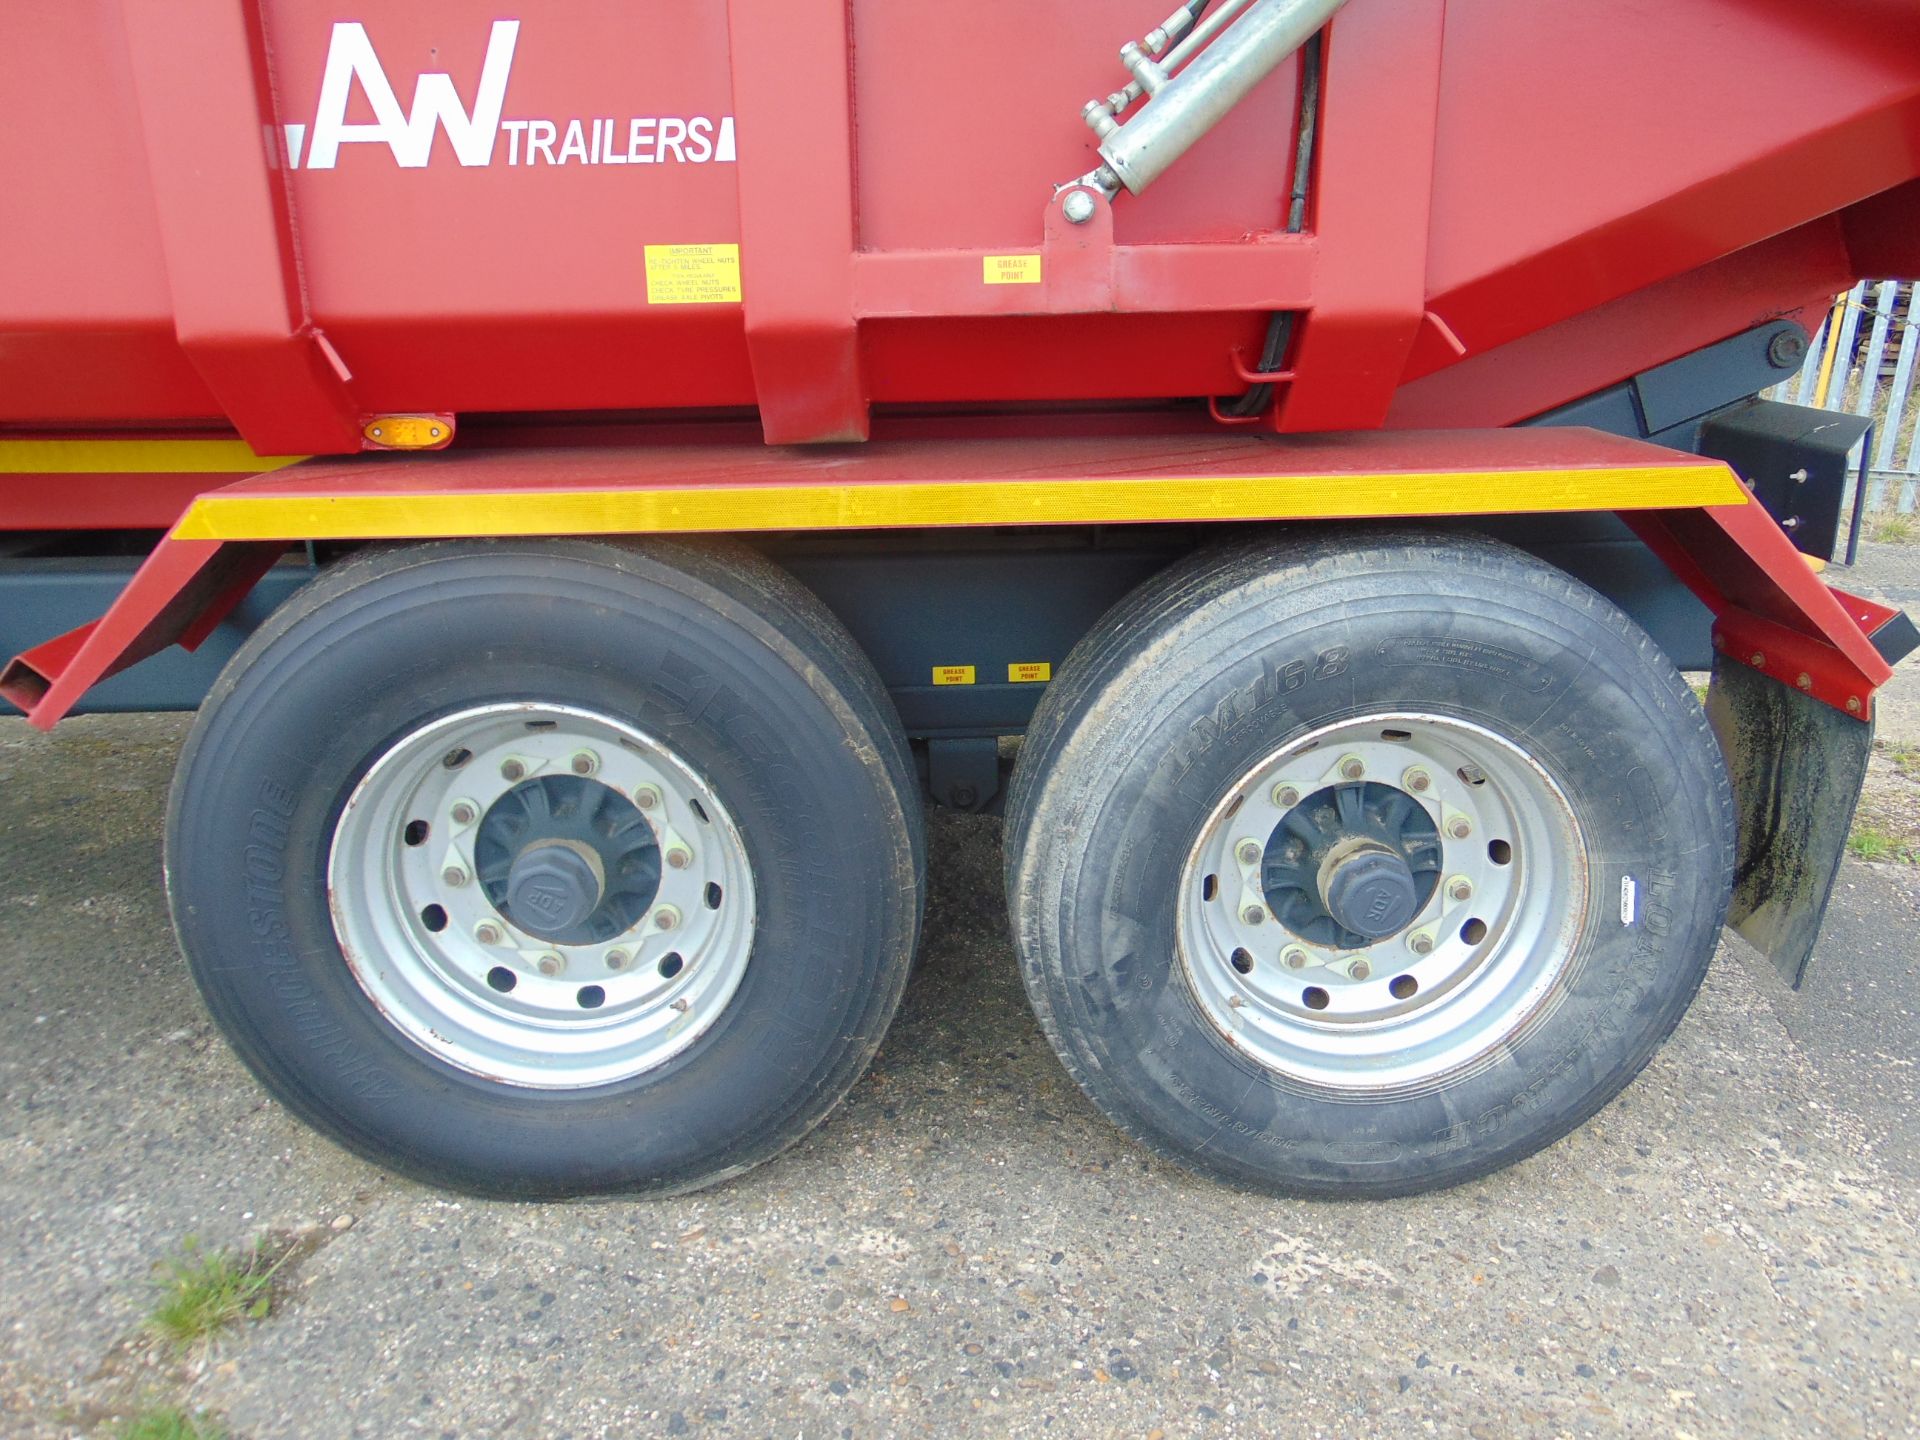 2012 AW Trailers 12T IDT - Tandem Axle Dumping Trailer - Image 29 of 39